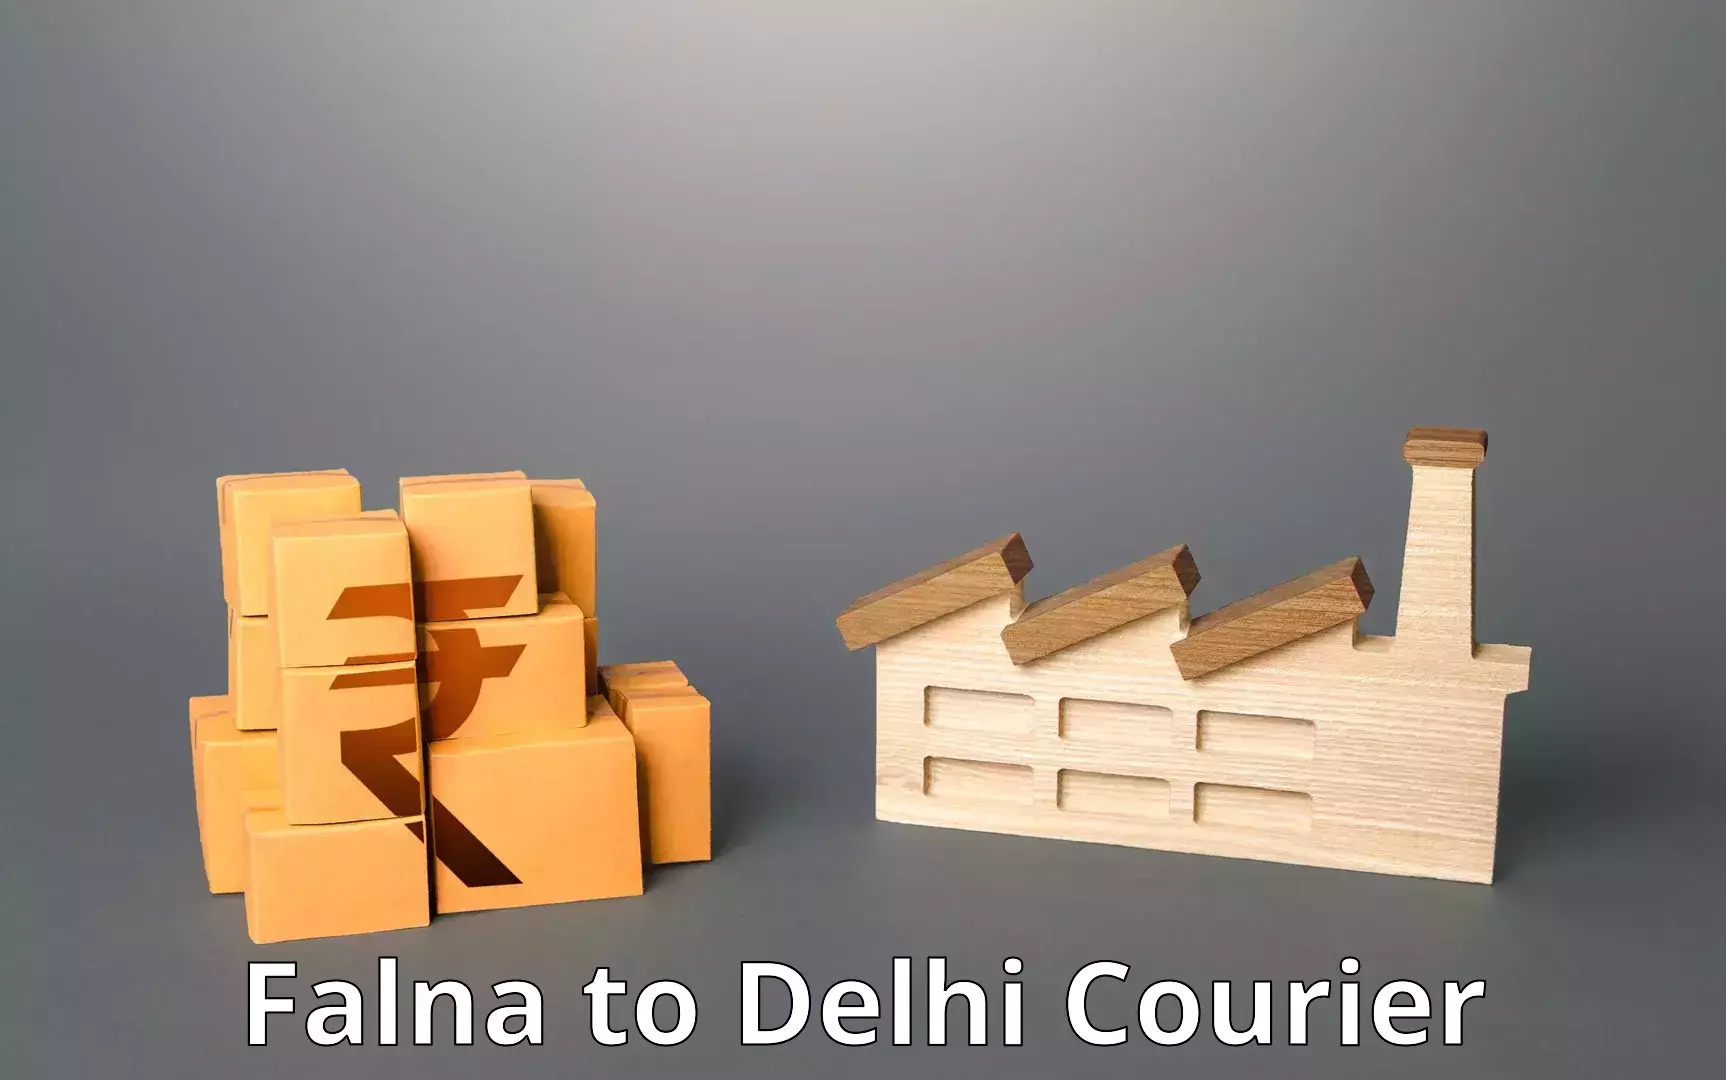 Doorstep delivery service Falna to Lodhi Road